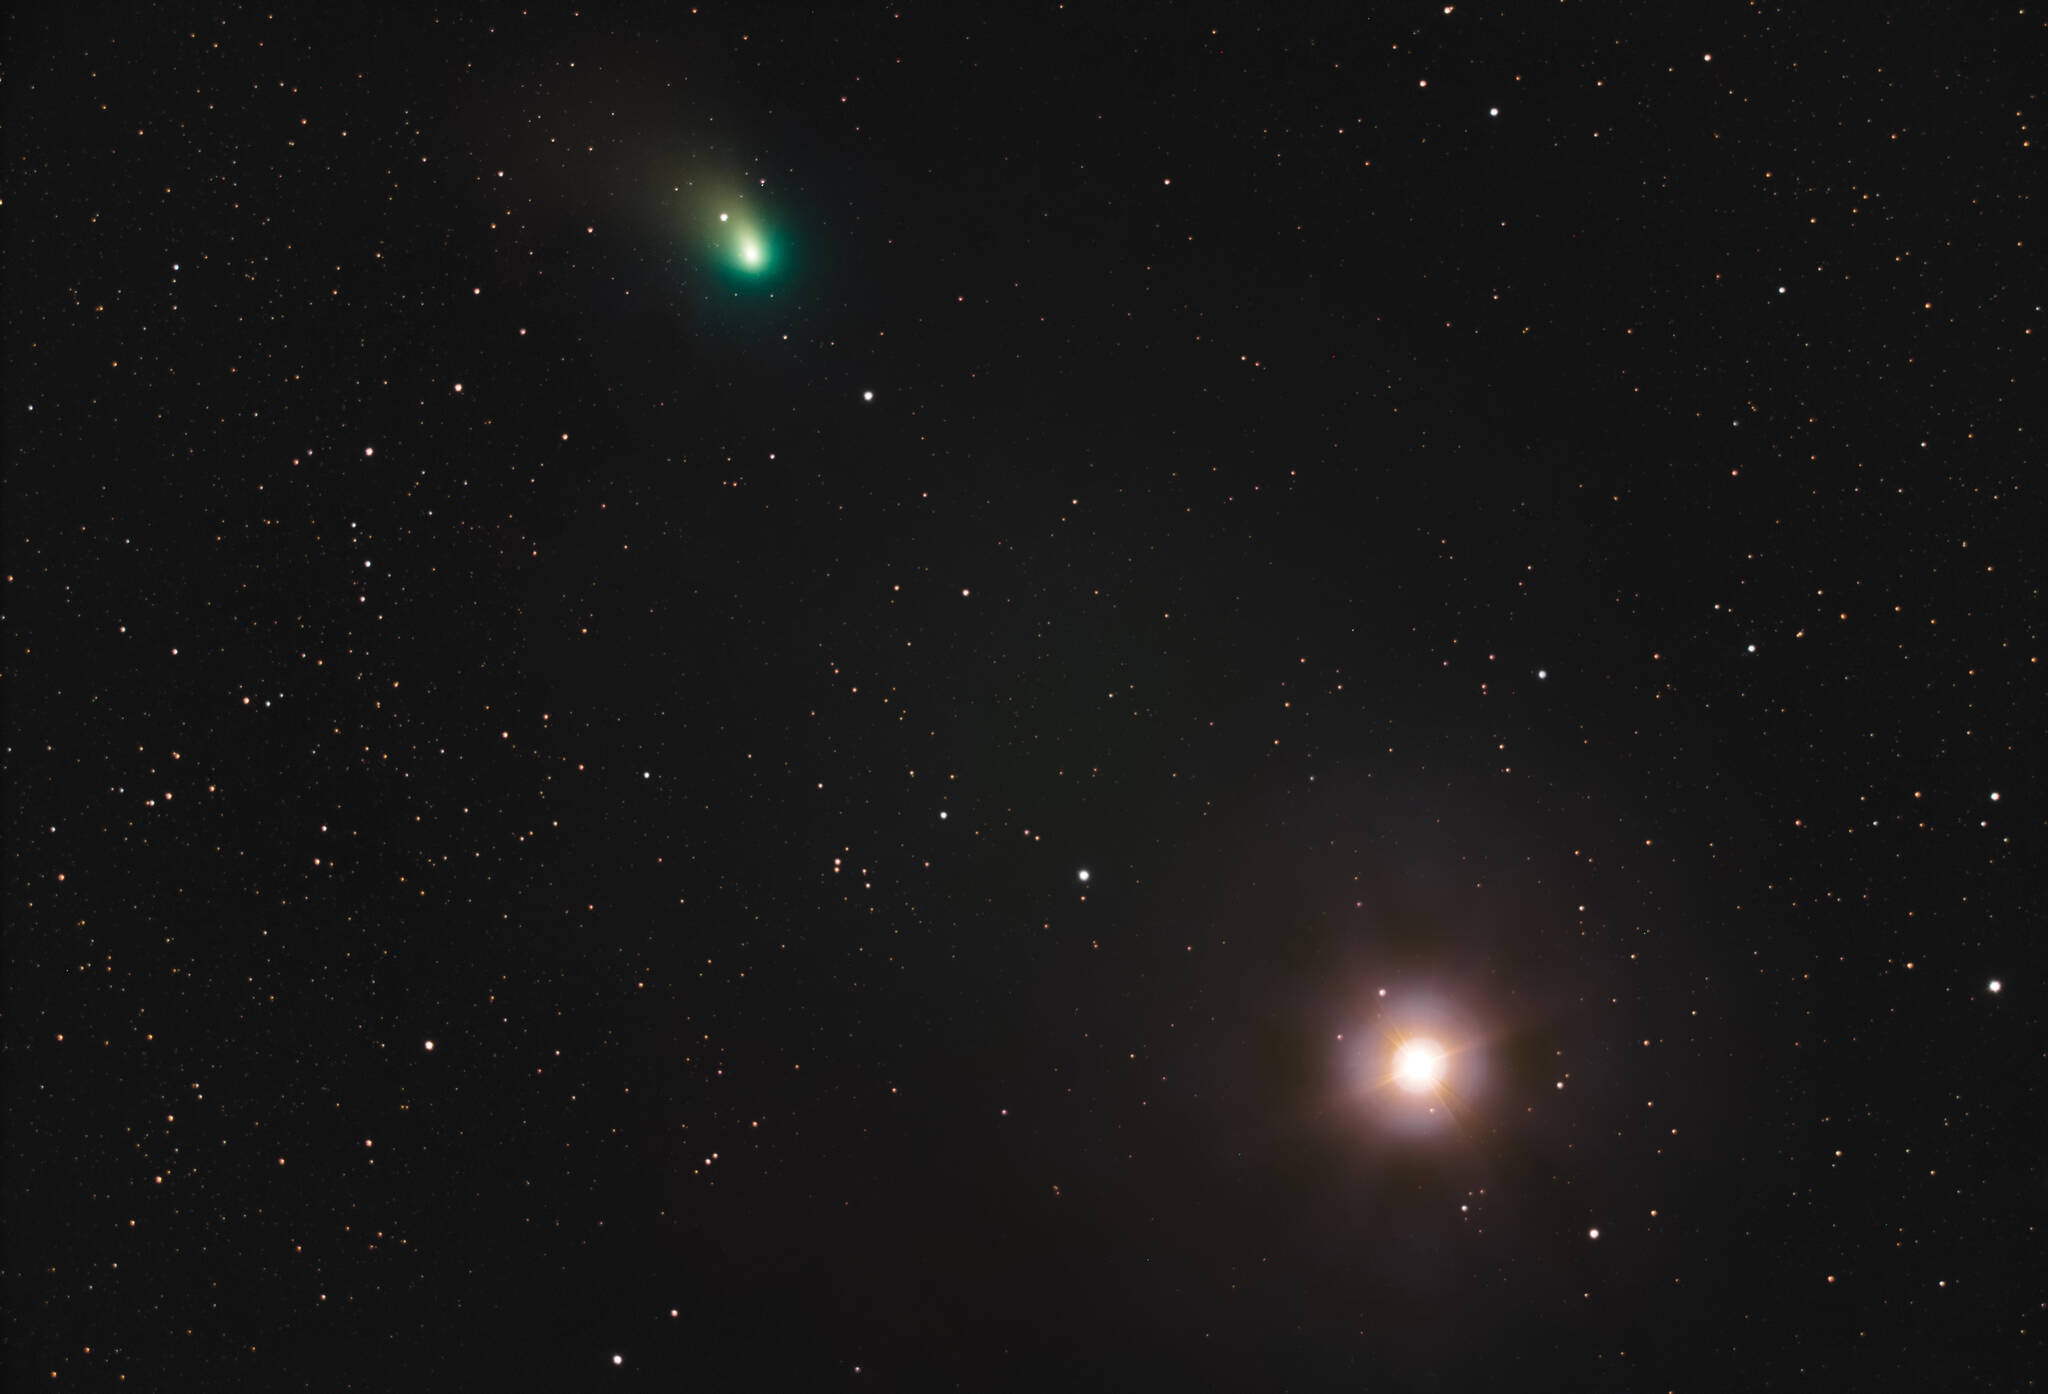 Cole Rees Courtesy Photo
A rare photo of the Green Comet pictured with the planet Mars Feb. 10 at the Ritchie Observatory, captured with a telescope. The comet is 28 million miles from earth in its first approach in 50,000 years.